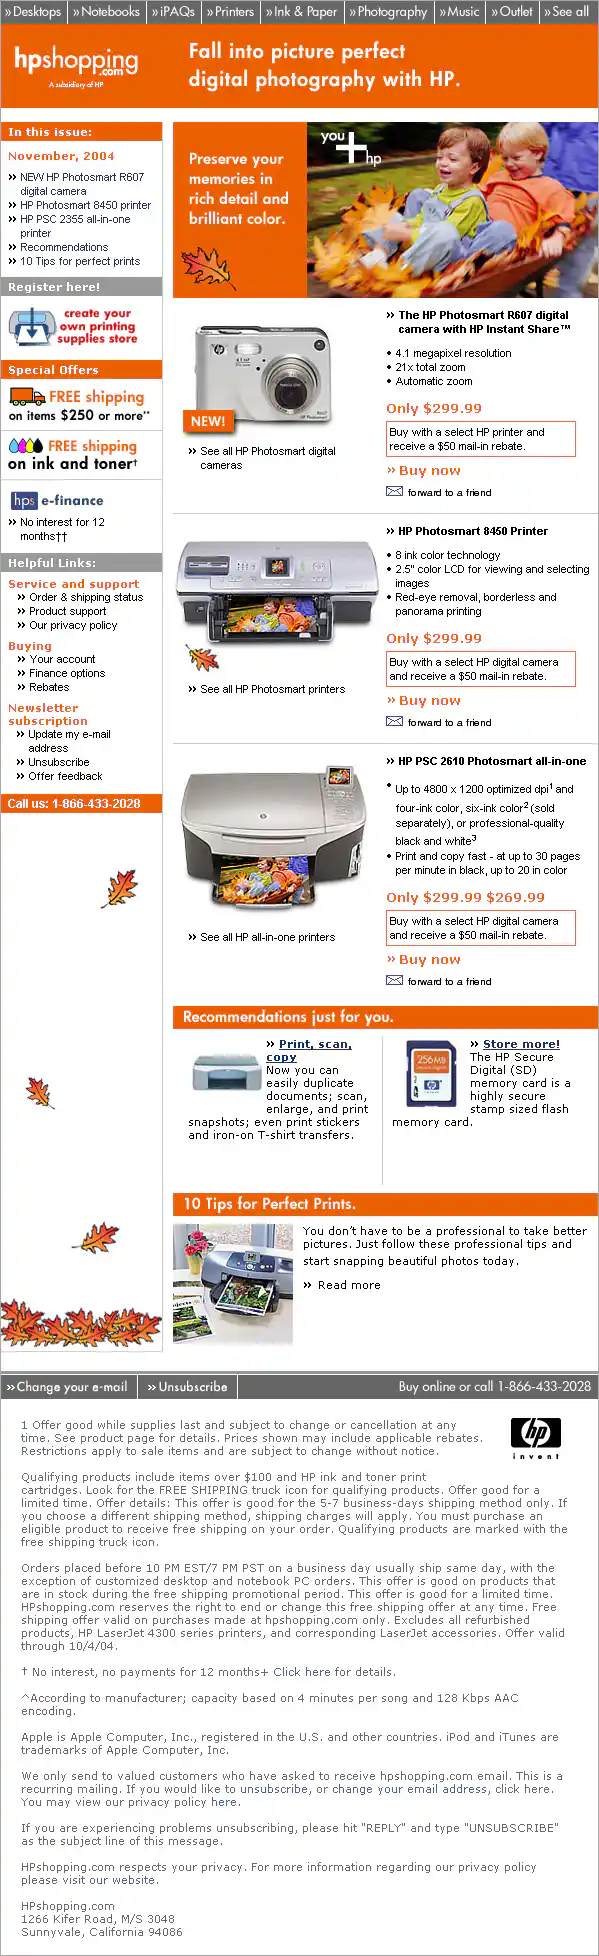 hp-fall-themed-shopping-email-newsletter